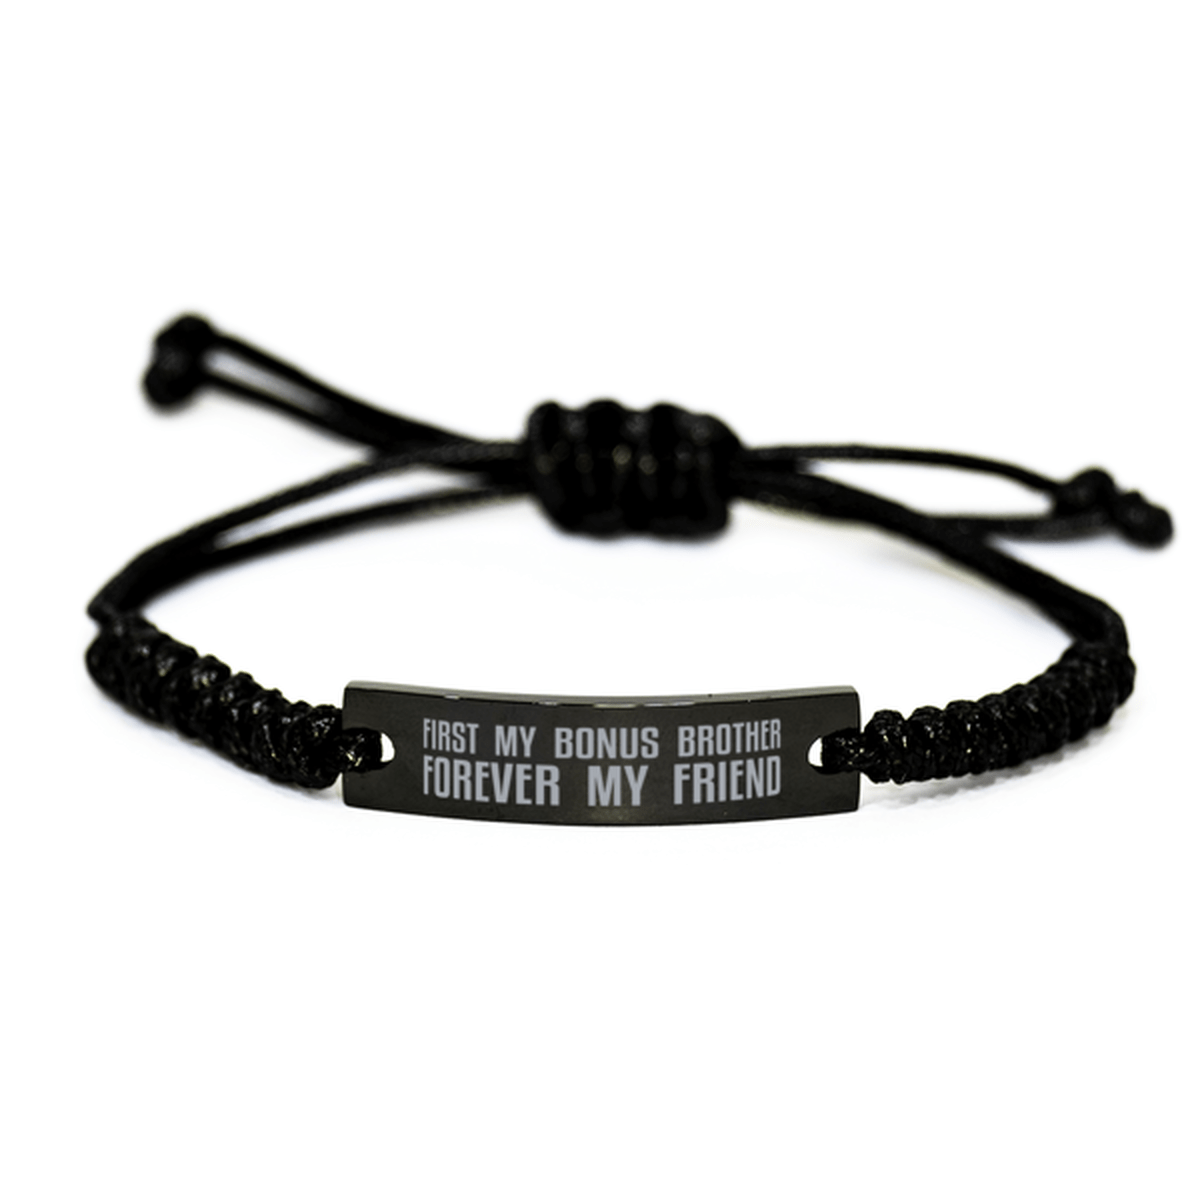 Unique Bonus Brother Engraved Rope Bracelet, First My Bonus Brother Forever My Friend, Best Gift for Stepbrother Brother-in-Law Birthday, Christmas